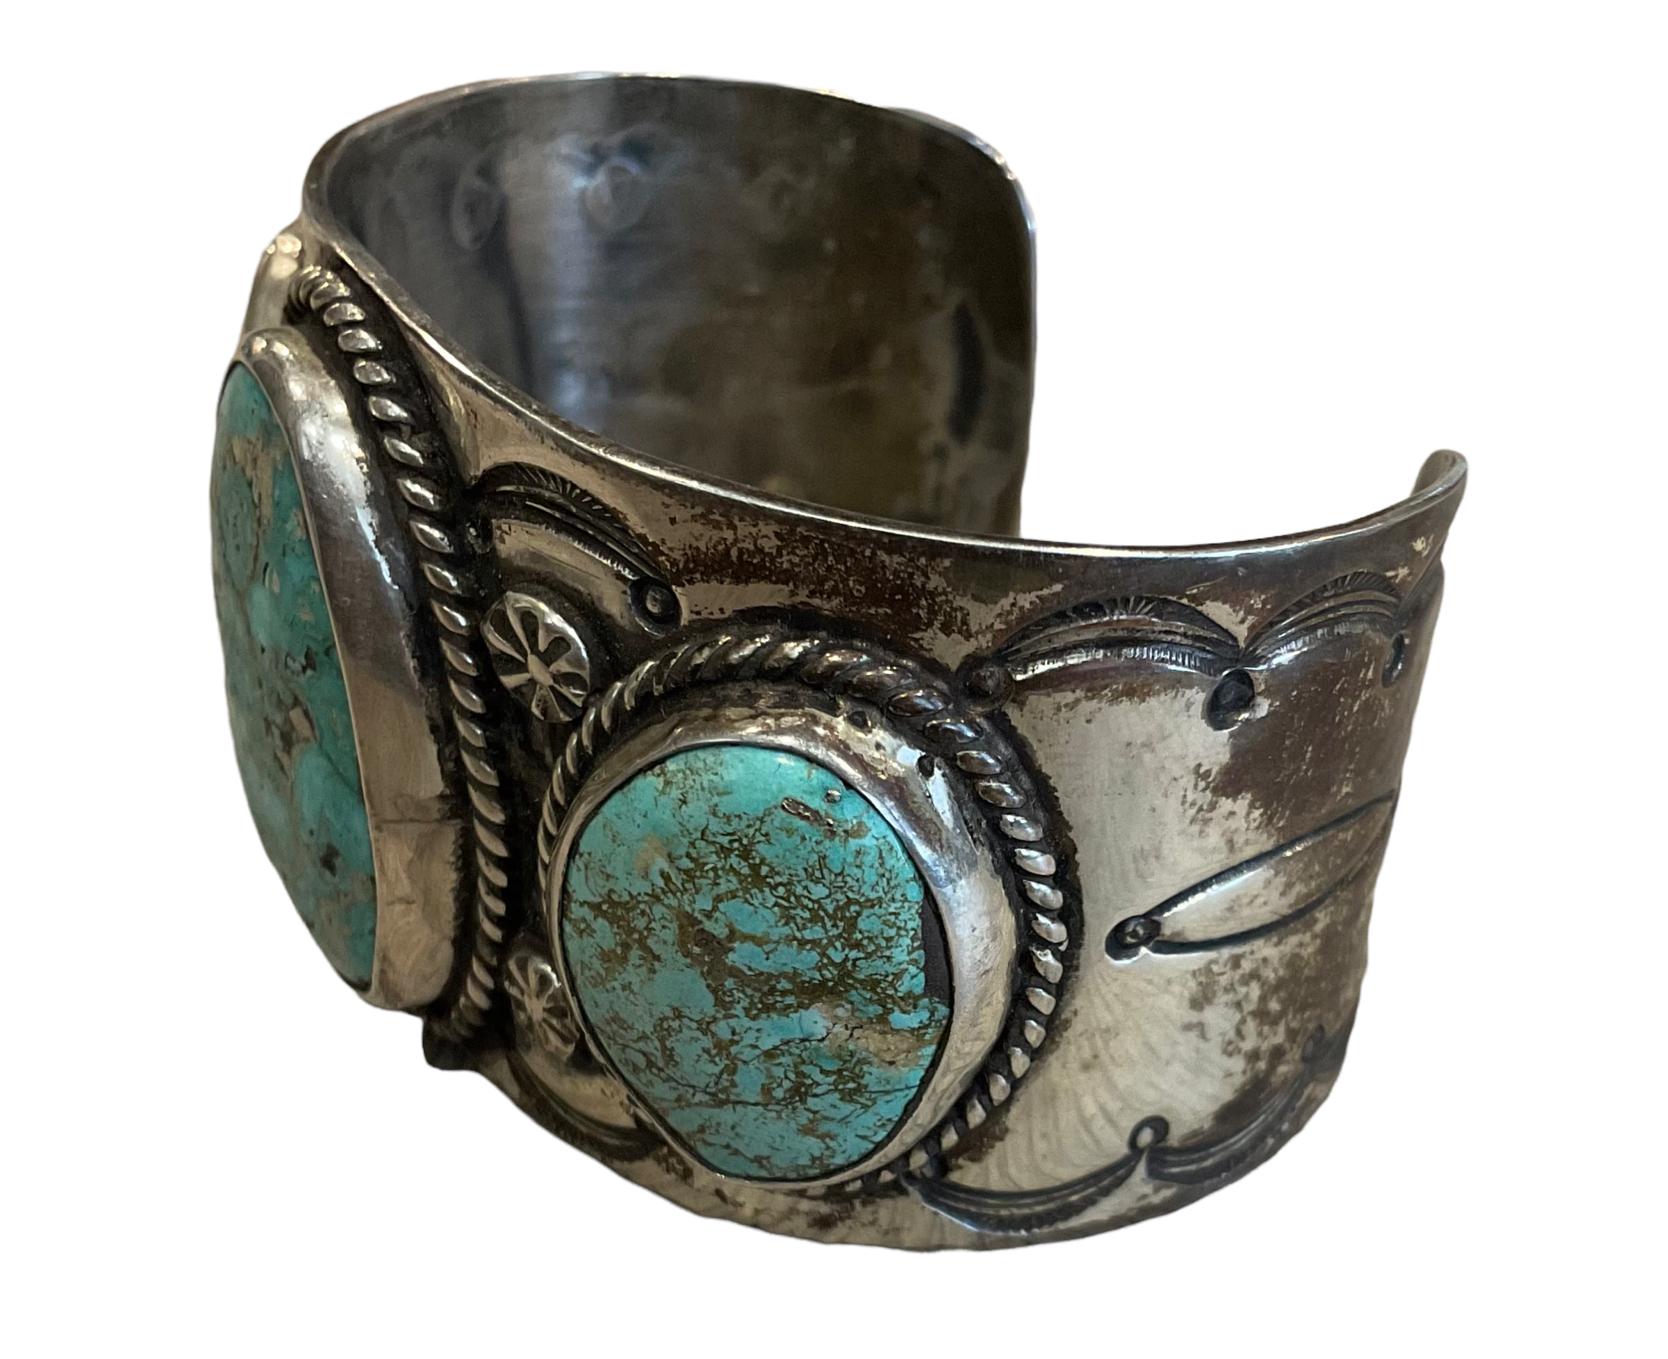 This Native American sterling silver cuff with sunbursts is clearly stamped JC with a sunburst hallmark and contains ultra-rare Morenci Turquoise, revealing a stunning Pyrite matrix. This piece is substantial and is a favorite of mine to offer. I